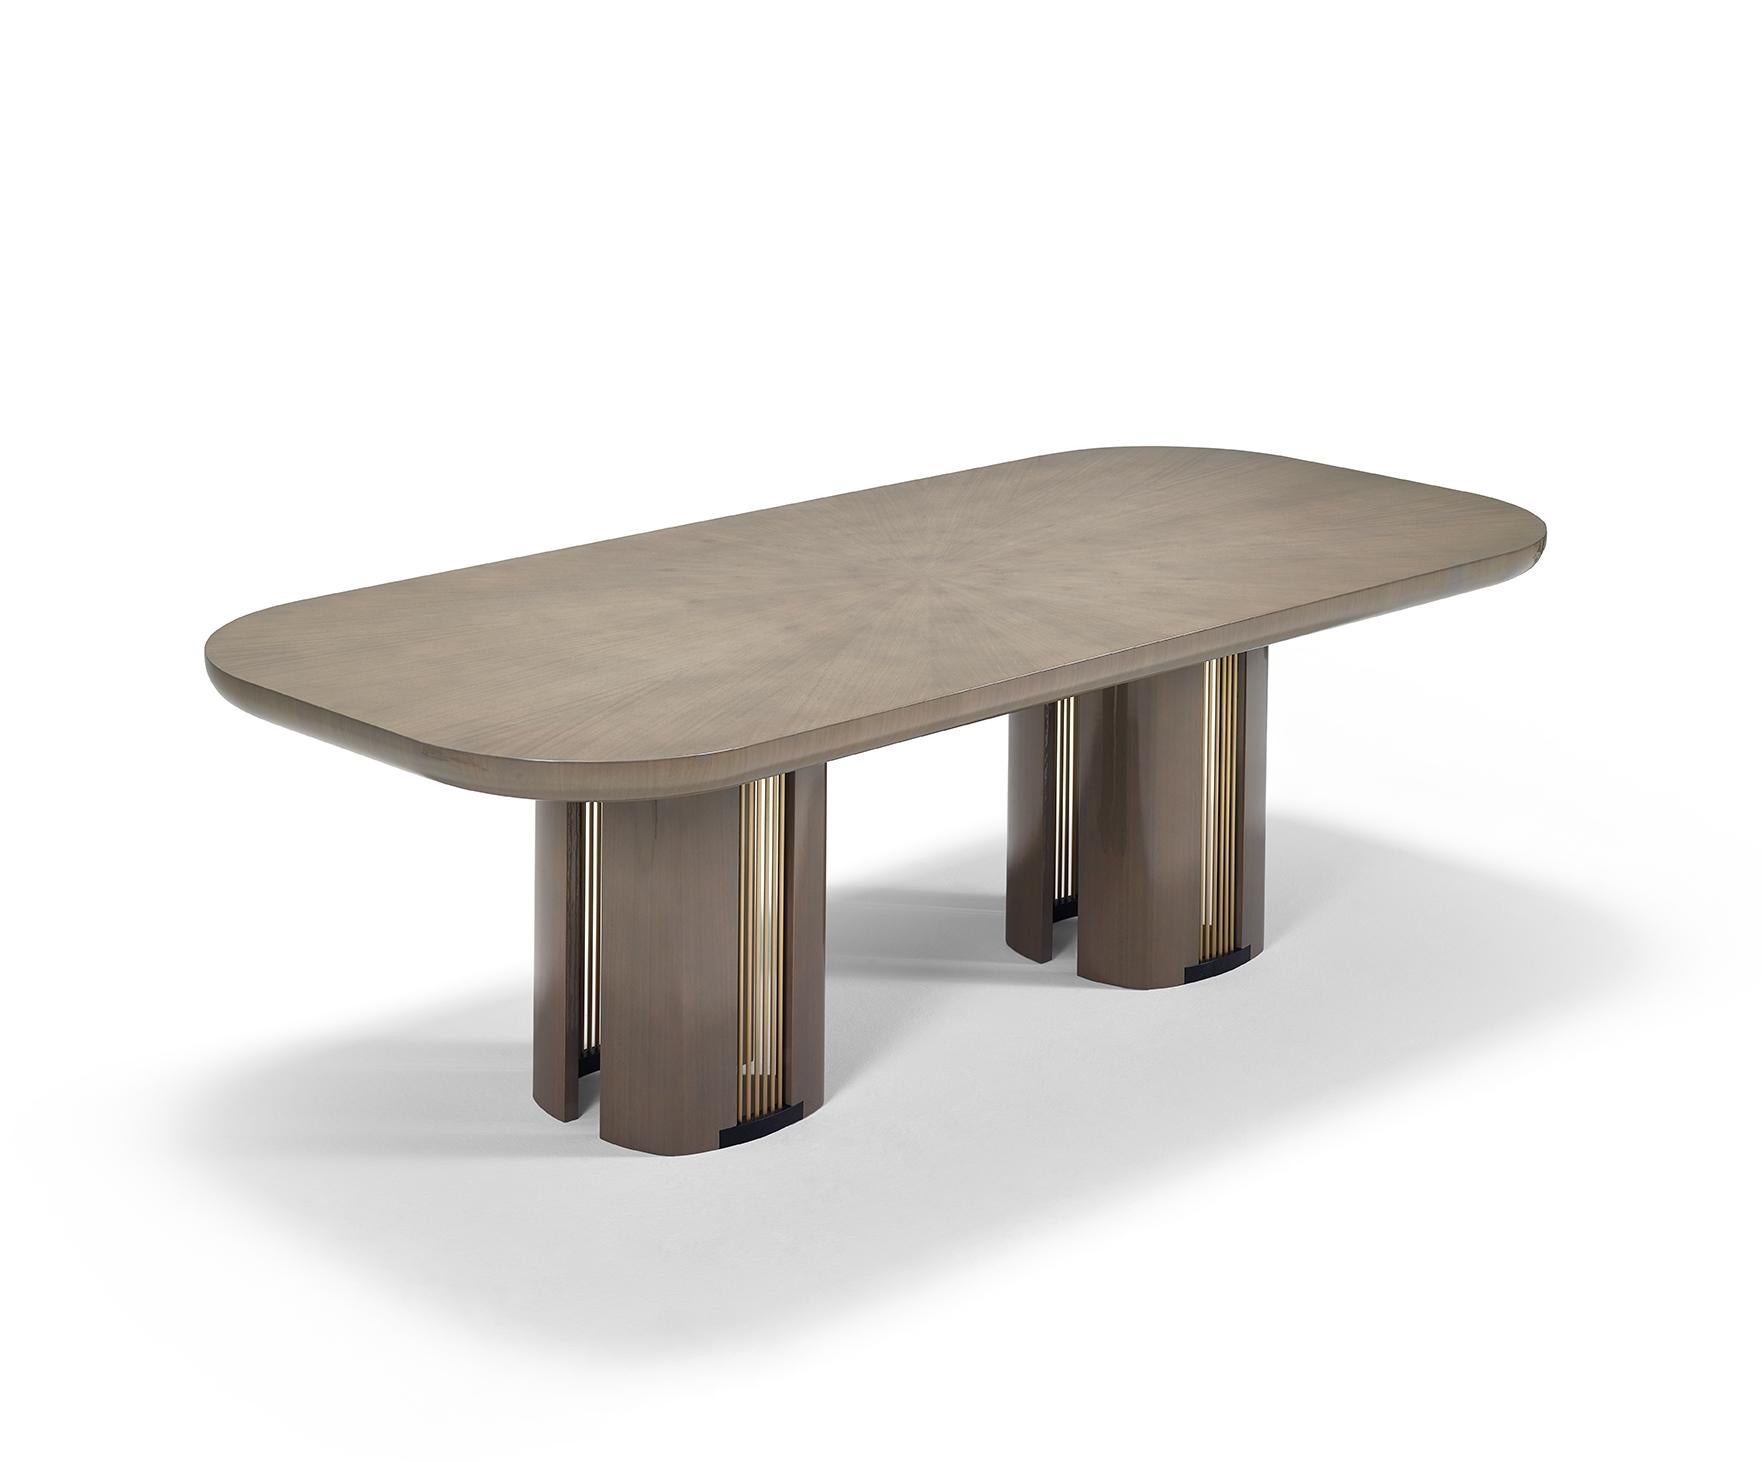 The distinctive BACALL is a very sensual dining table with a strong character. The full-bodied top in wood is settled on the well-gauged legs, which are embellished with the beauty of the brass details. Made of a wooden structure, Bacall can be